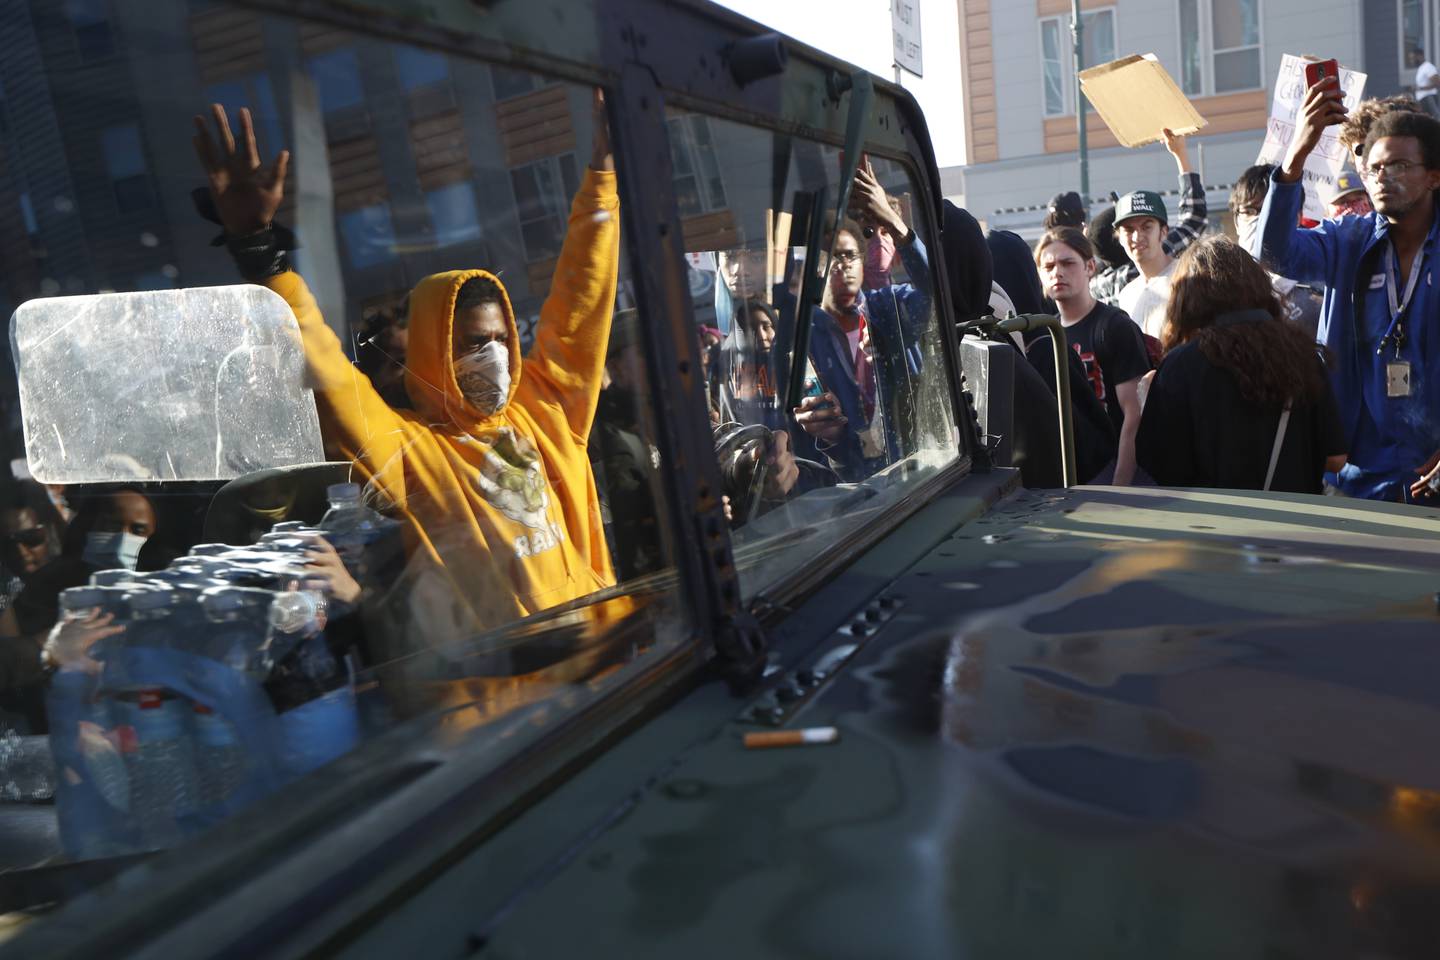 Protesters stand near a Minnesota National Guard vehicle Friday, May 29, 2020, in Minneapolis. Protests continued following the death of George Floyd, who died after being restrained by Minneapolis police officers on Memorial Day.